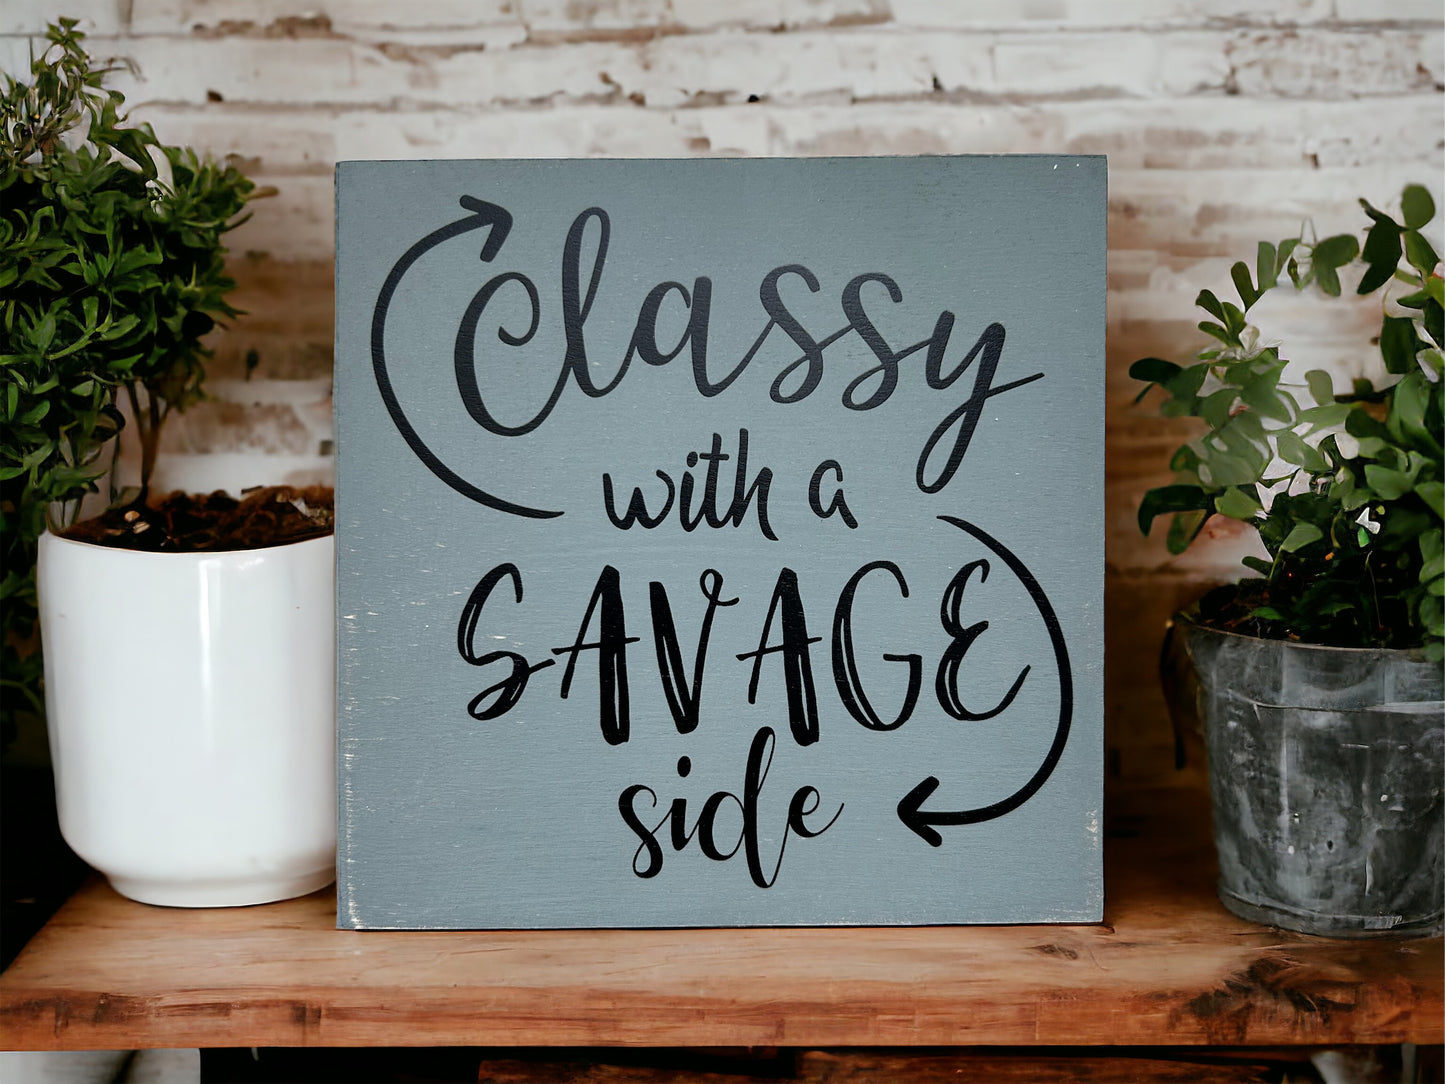 Classy With a Savage Side - Funny Rustic Wood Shelf Sitter